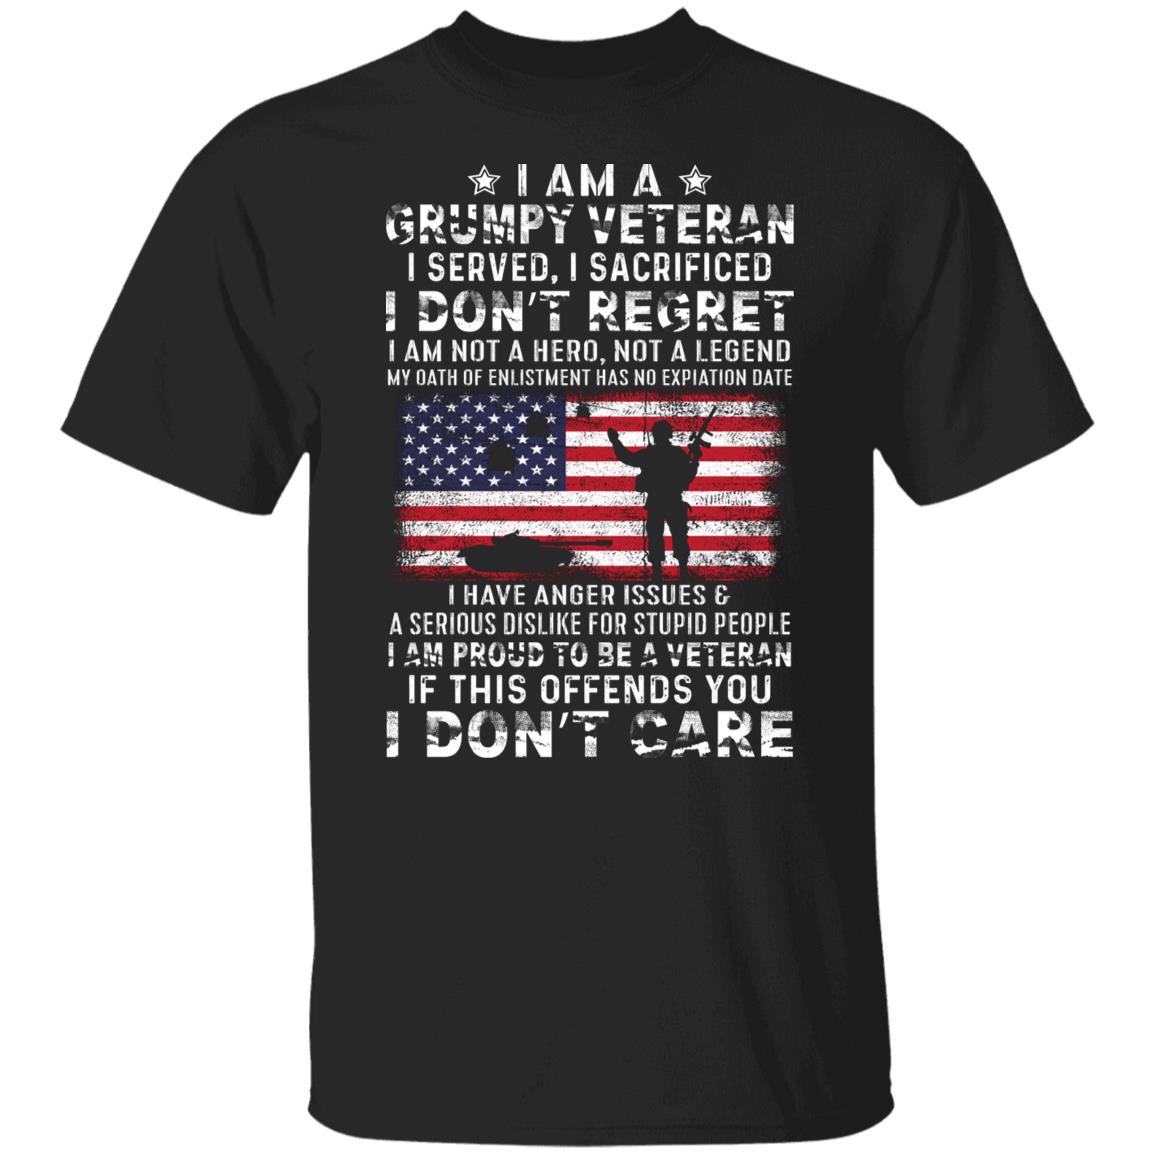 I am A Grumpy Veteran T-shirt I Have Anger Issues and a Serious Dislike for Stupid People Shirt